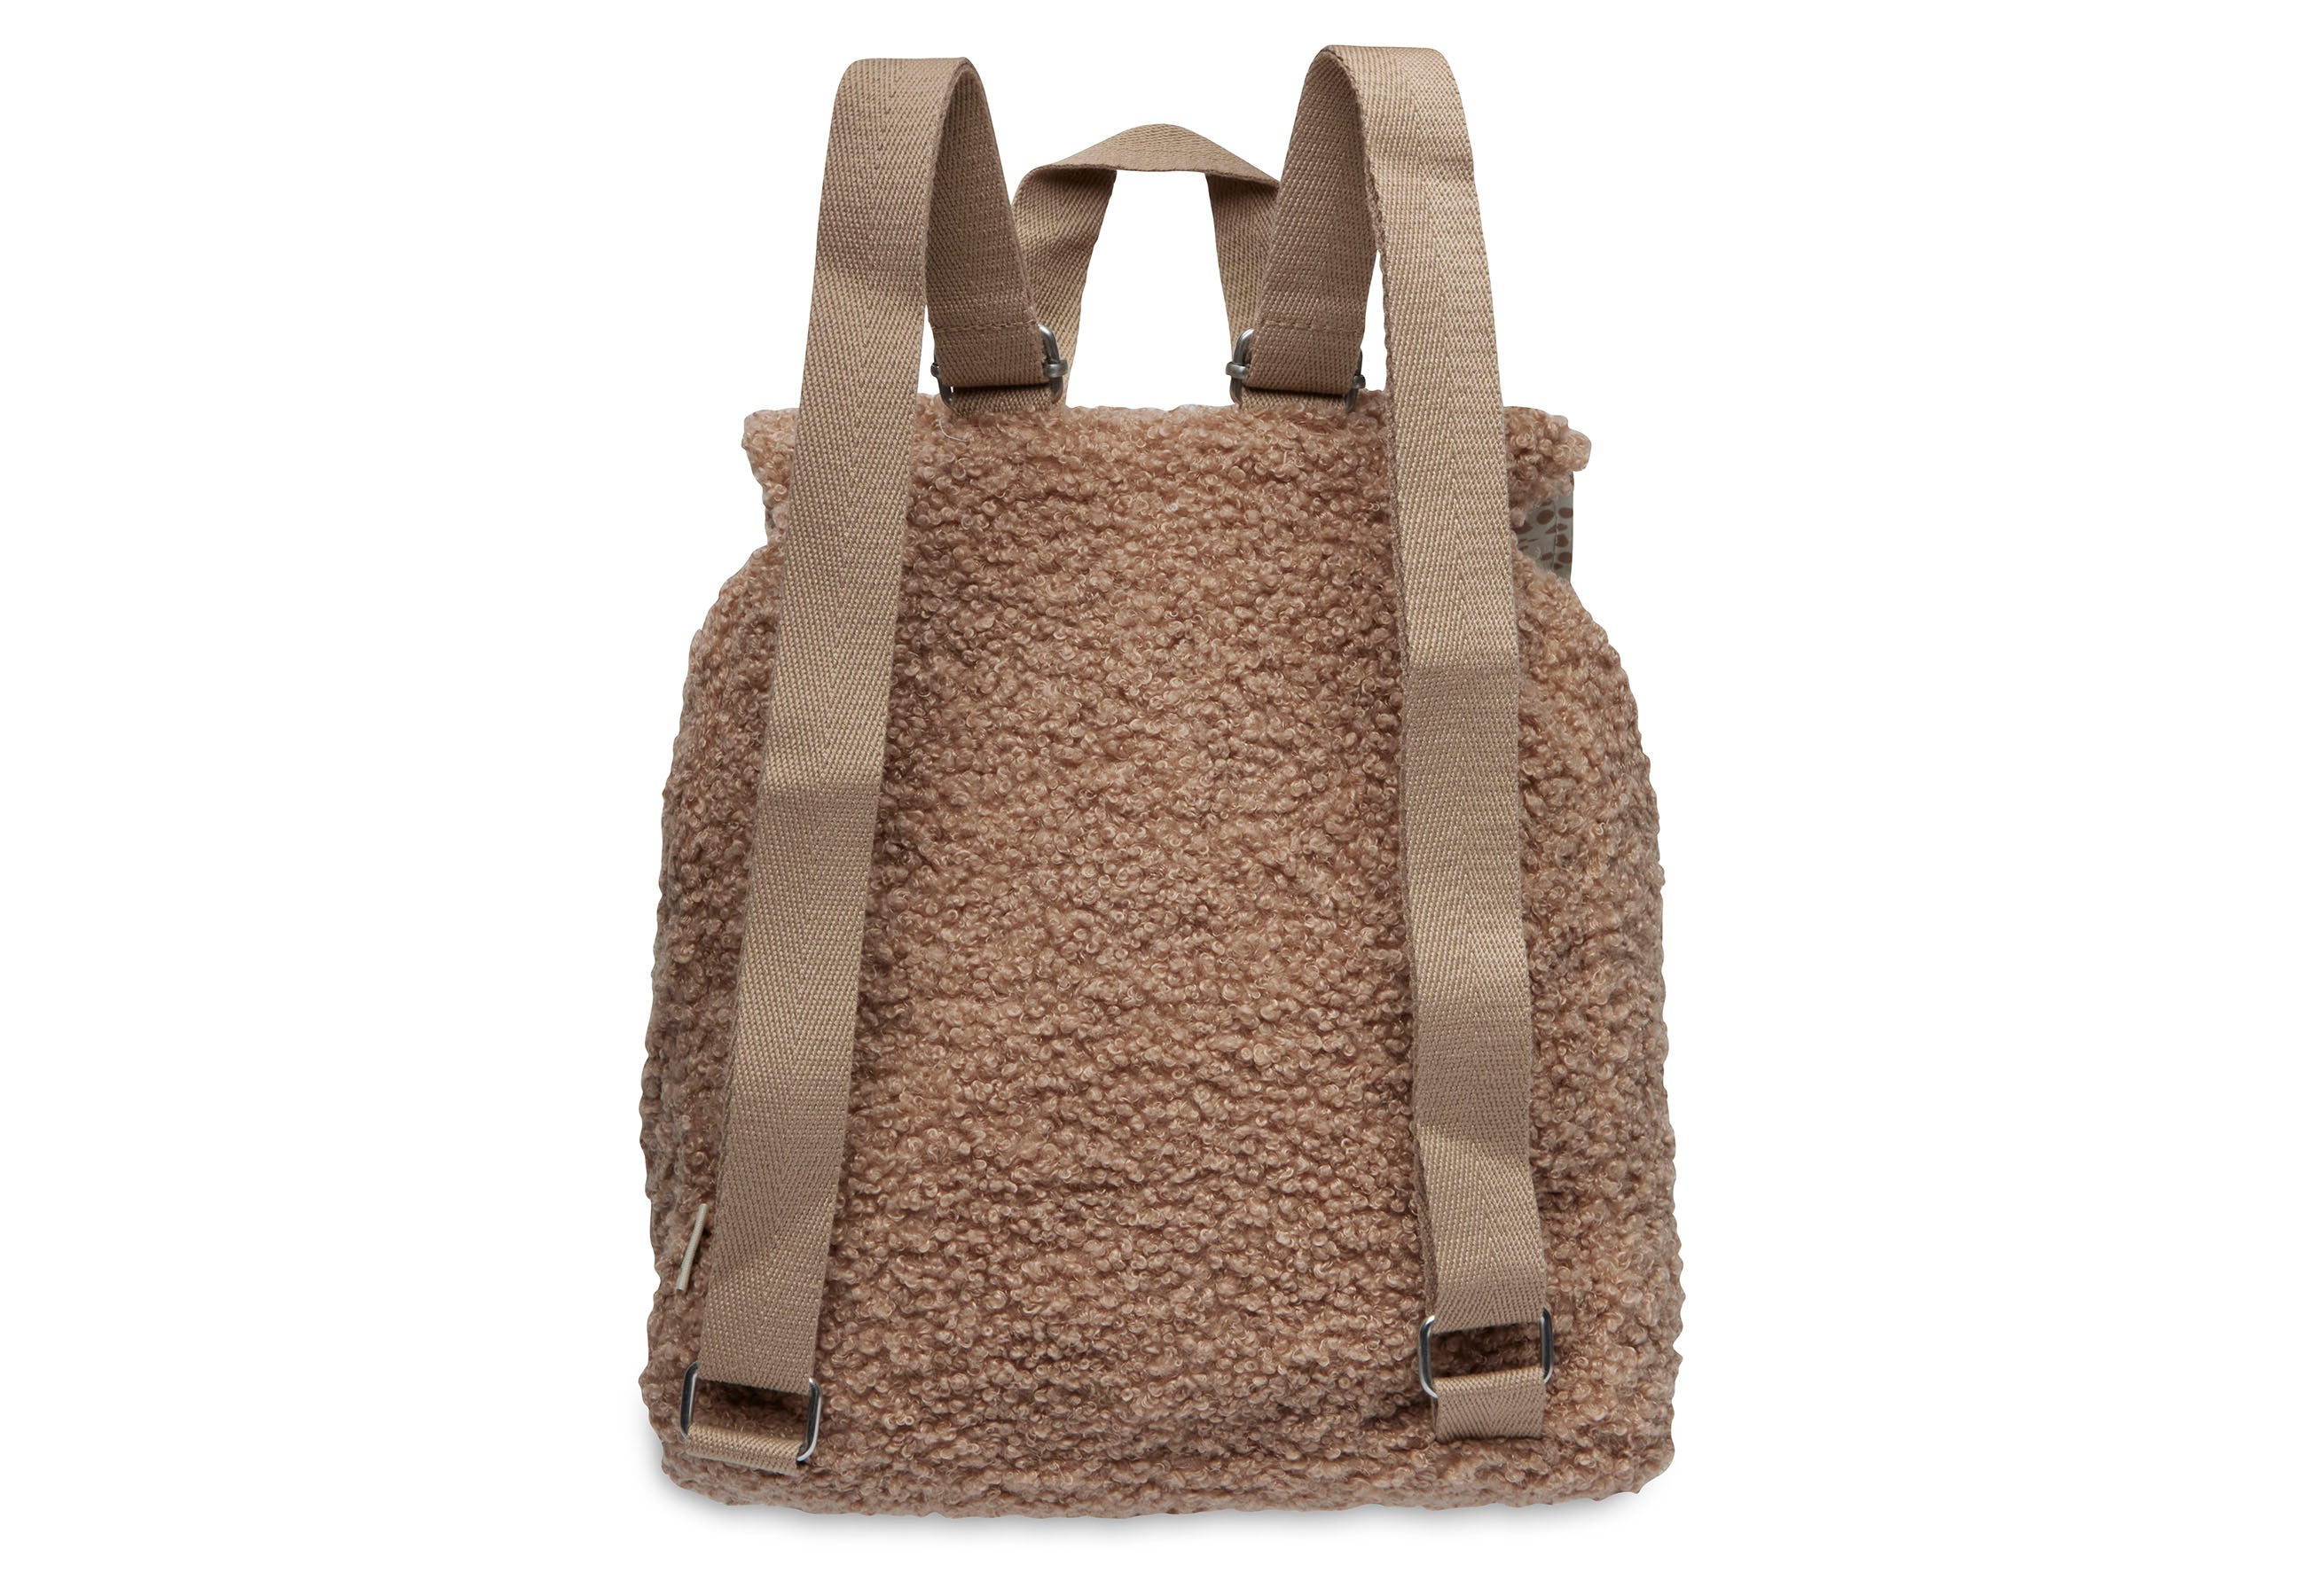 Jollein boucle biscuit kids and toddler backpack